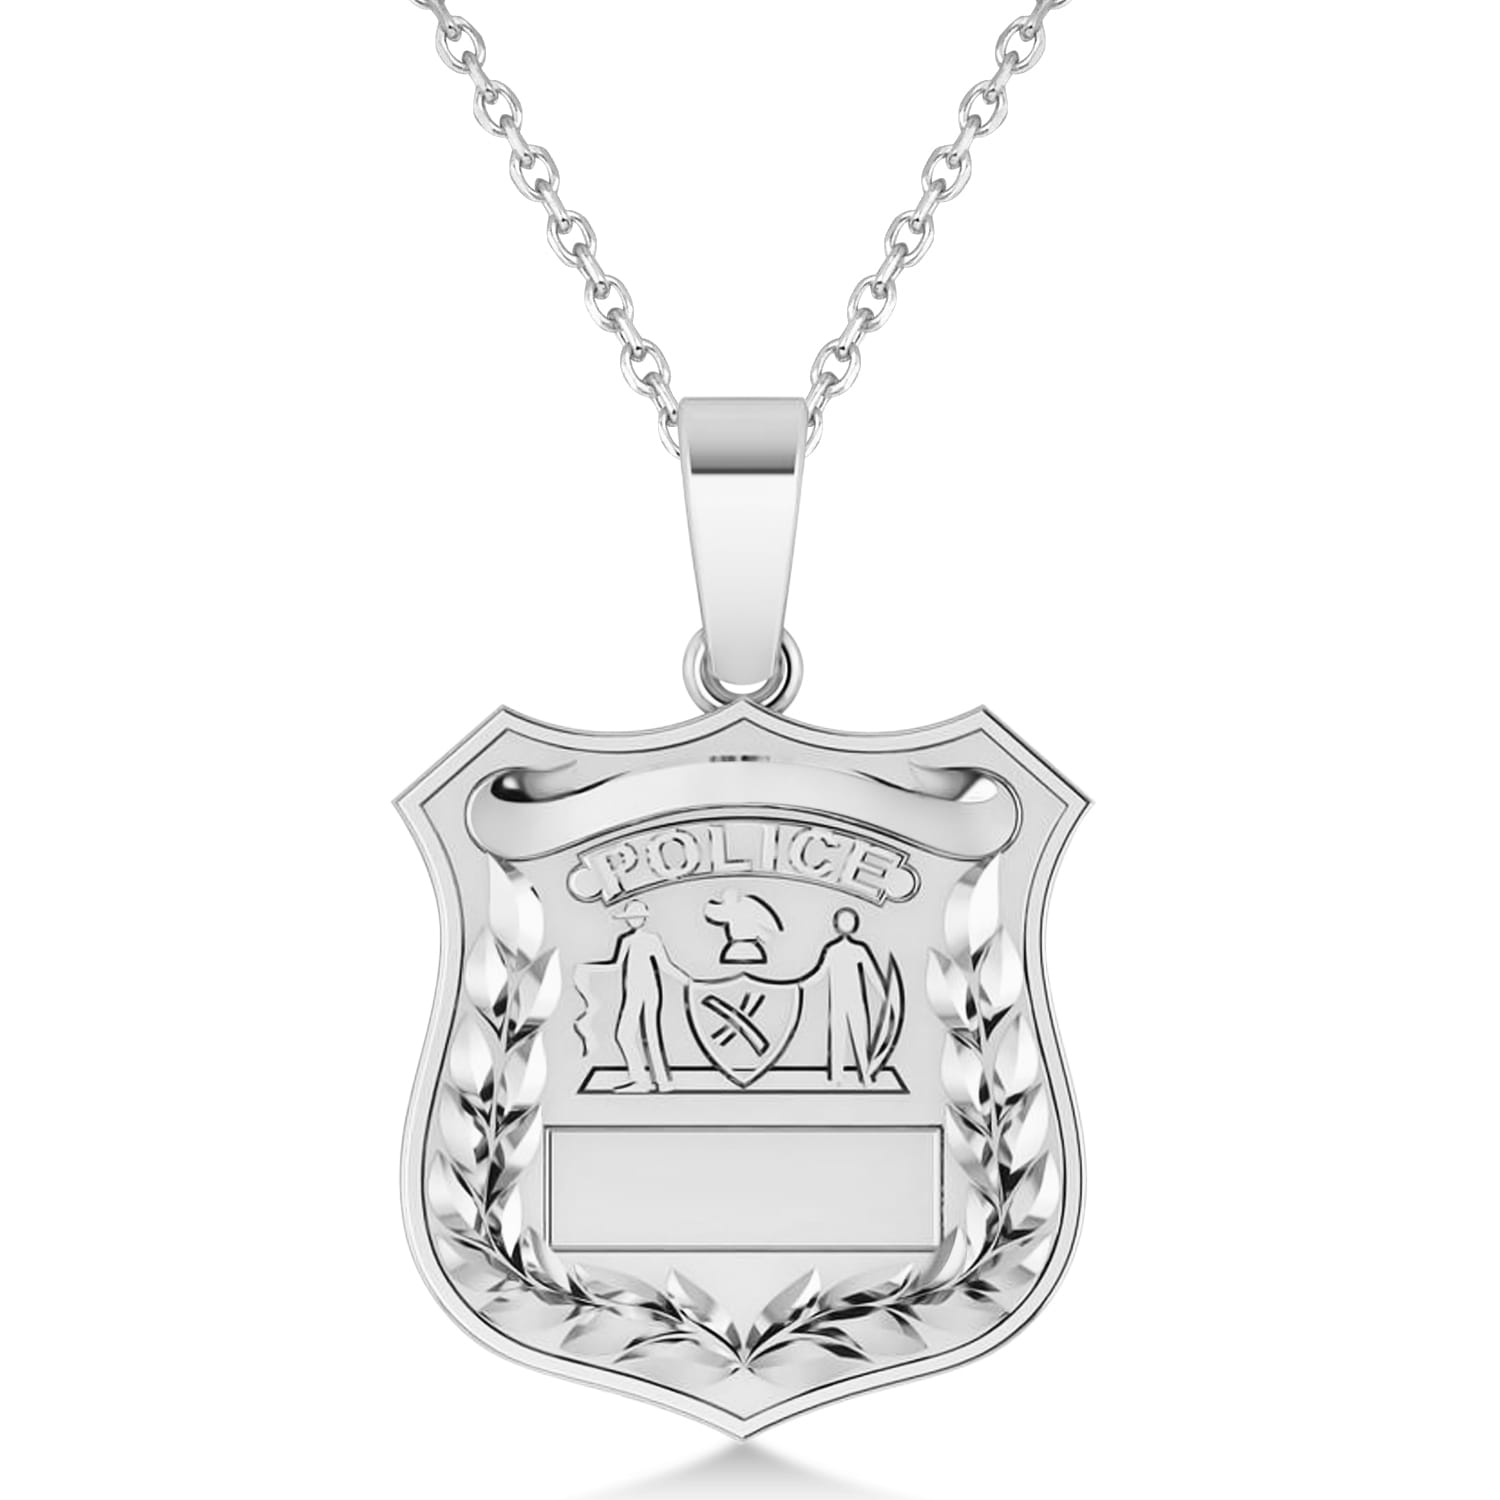 Police Department Badge Pendant Necklace 14k White Gold